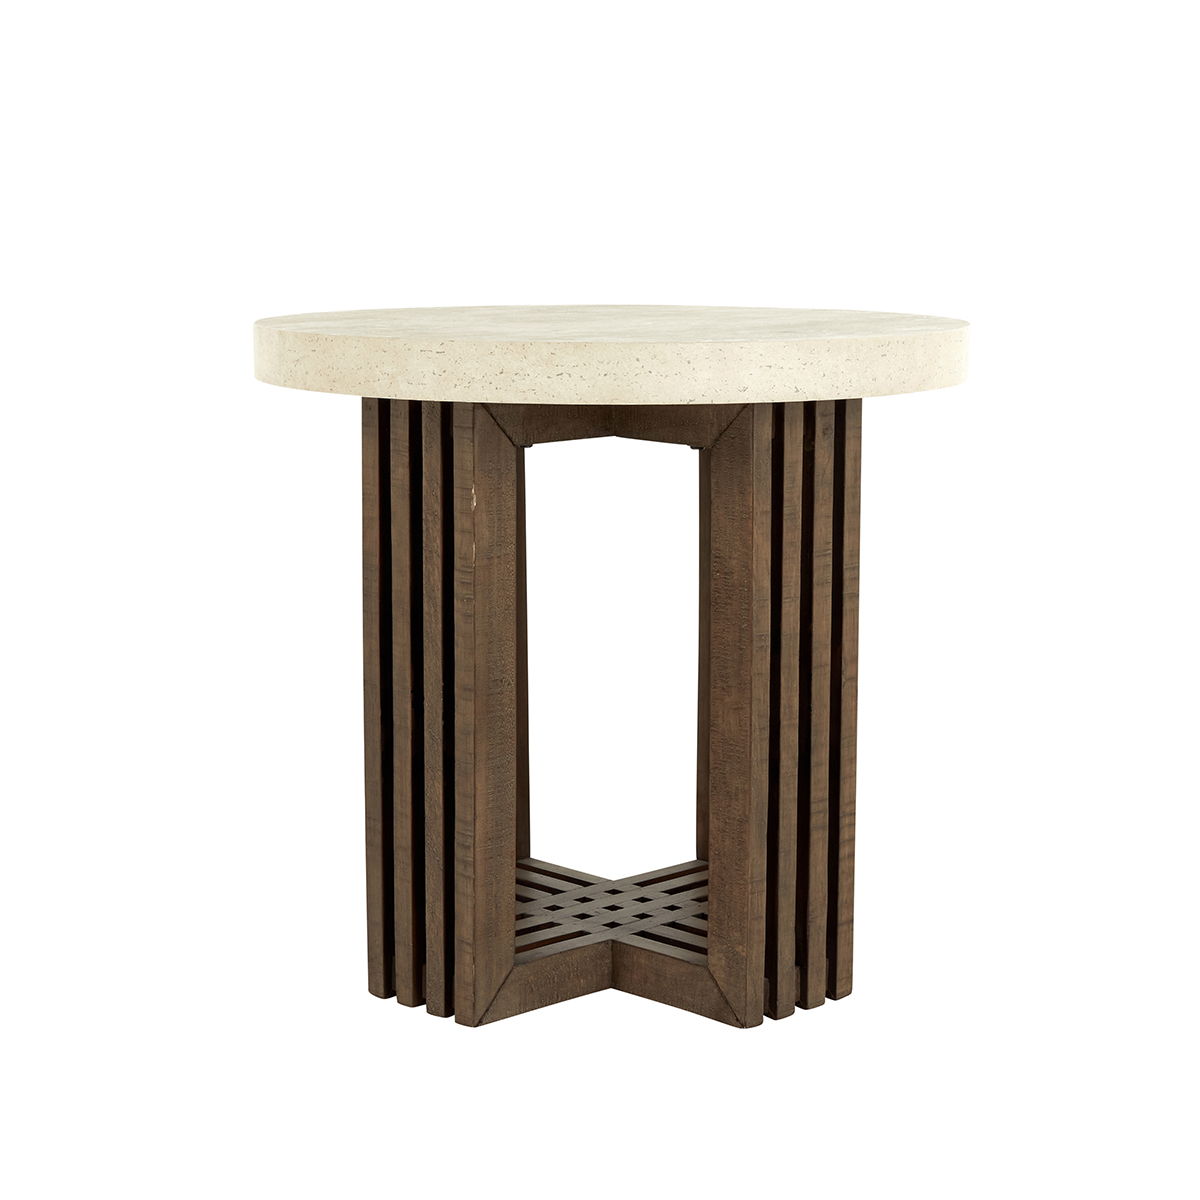 Aspen - Round End Table - Distressed Brown/Antique White